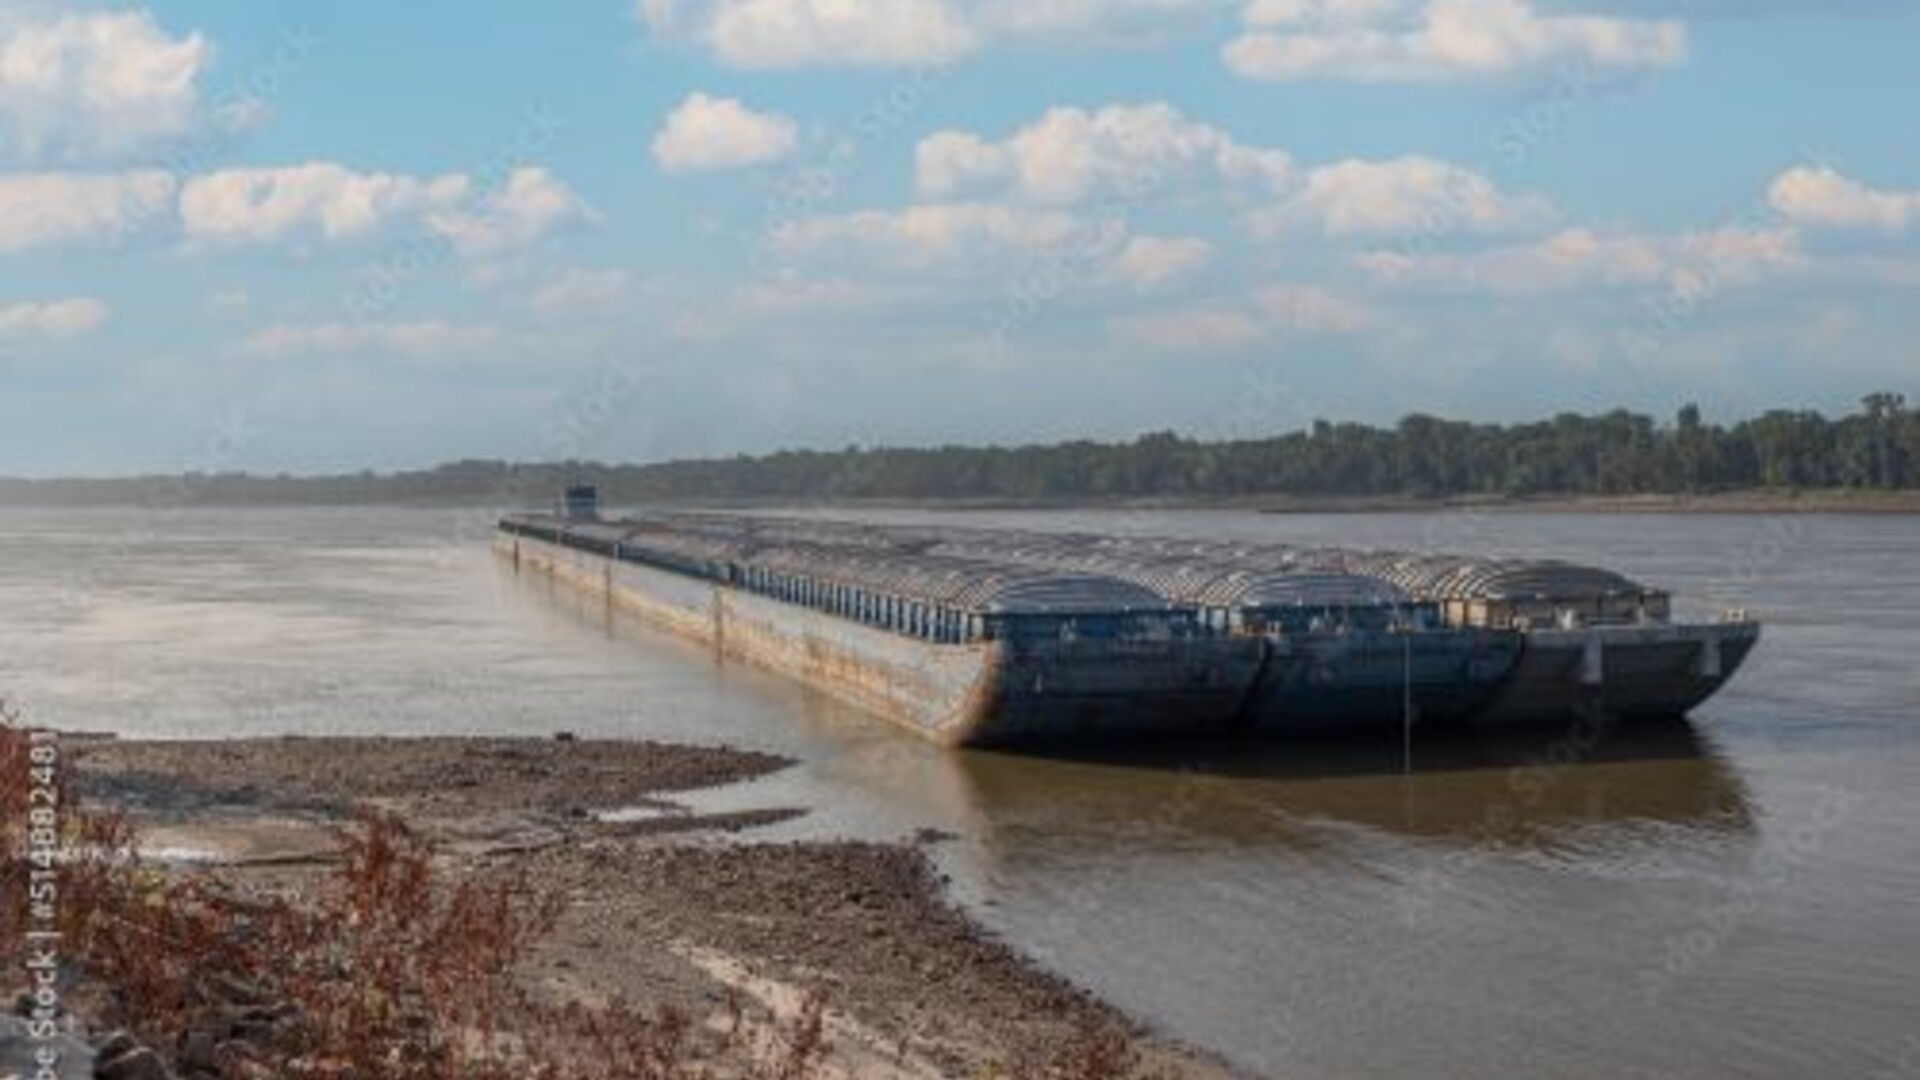 Commodities Affected by Low Mississippi River Flows